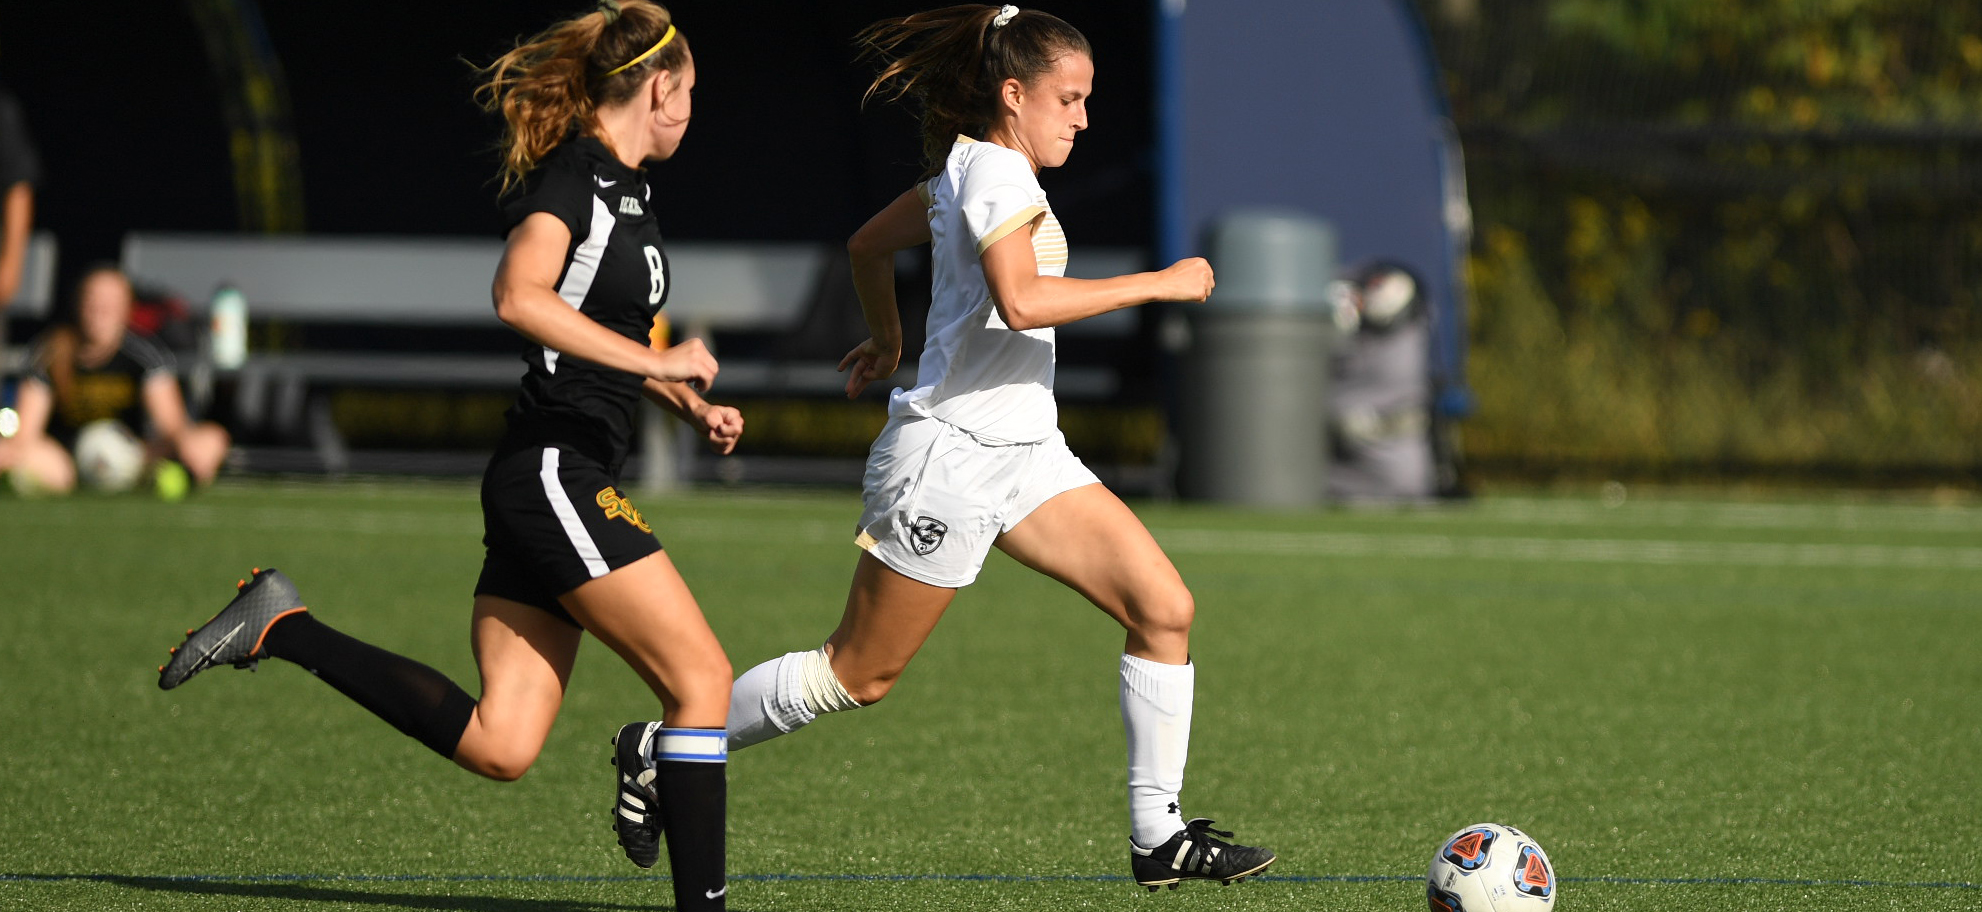 Meadow Walshaw-Wertz bagged her first career brace to help Juniata cruise past St. Vincent.